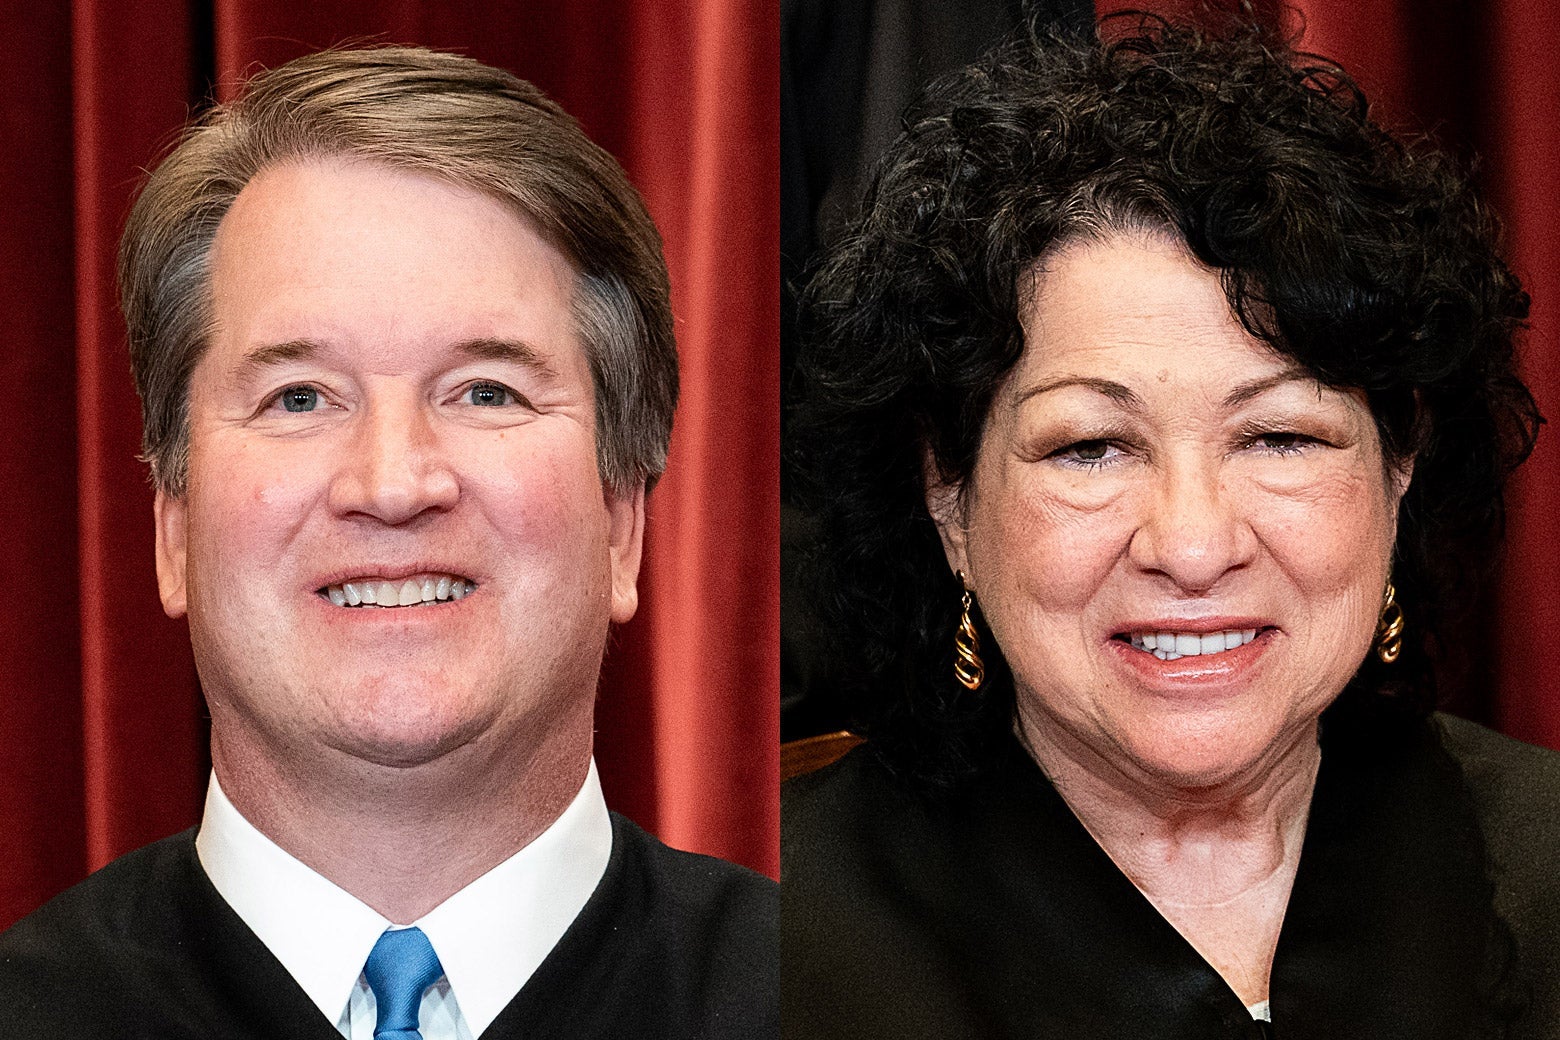 Side by side photos of Brett Kavanaugh and Sonia Sotomayor smiling in their robes in front of a red curtain